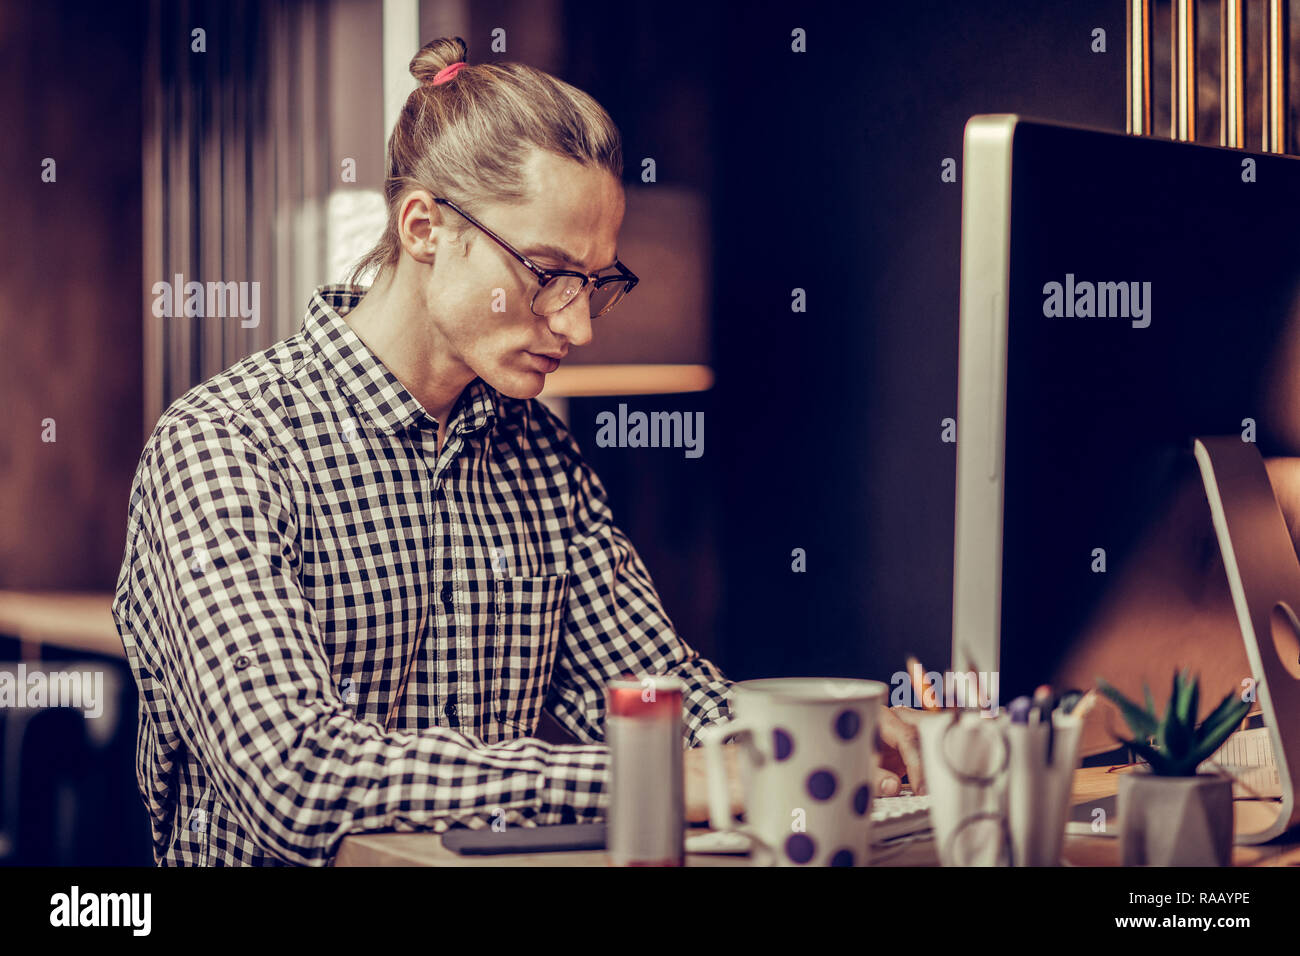 Concentrated male person typing text on his computer Stock Photo